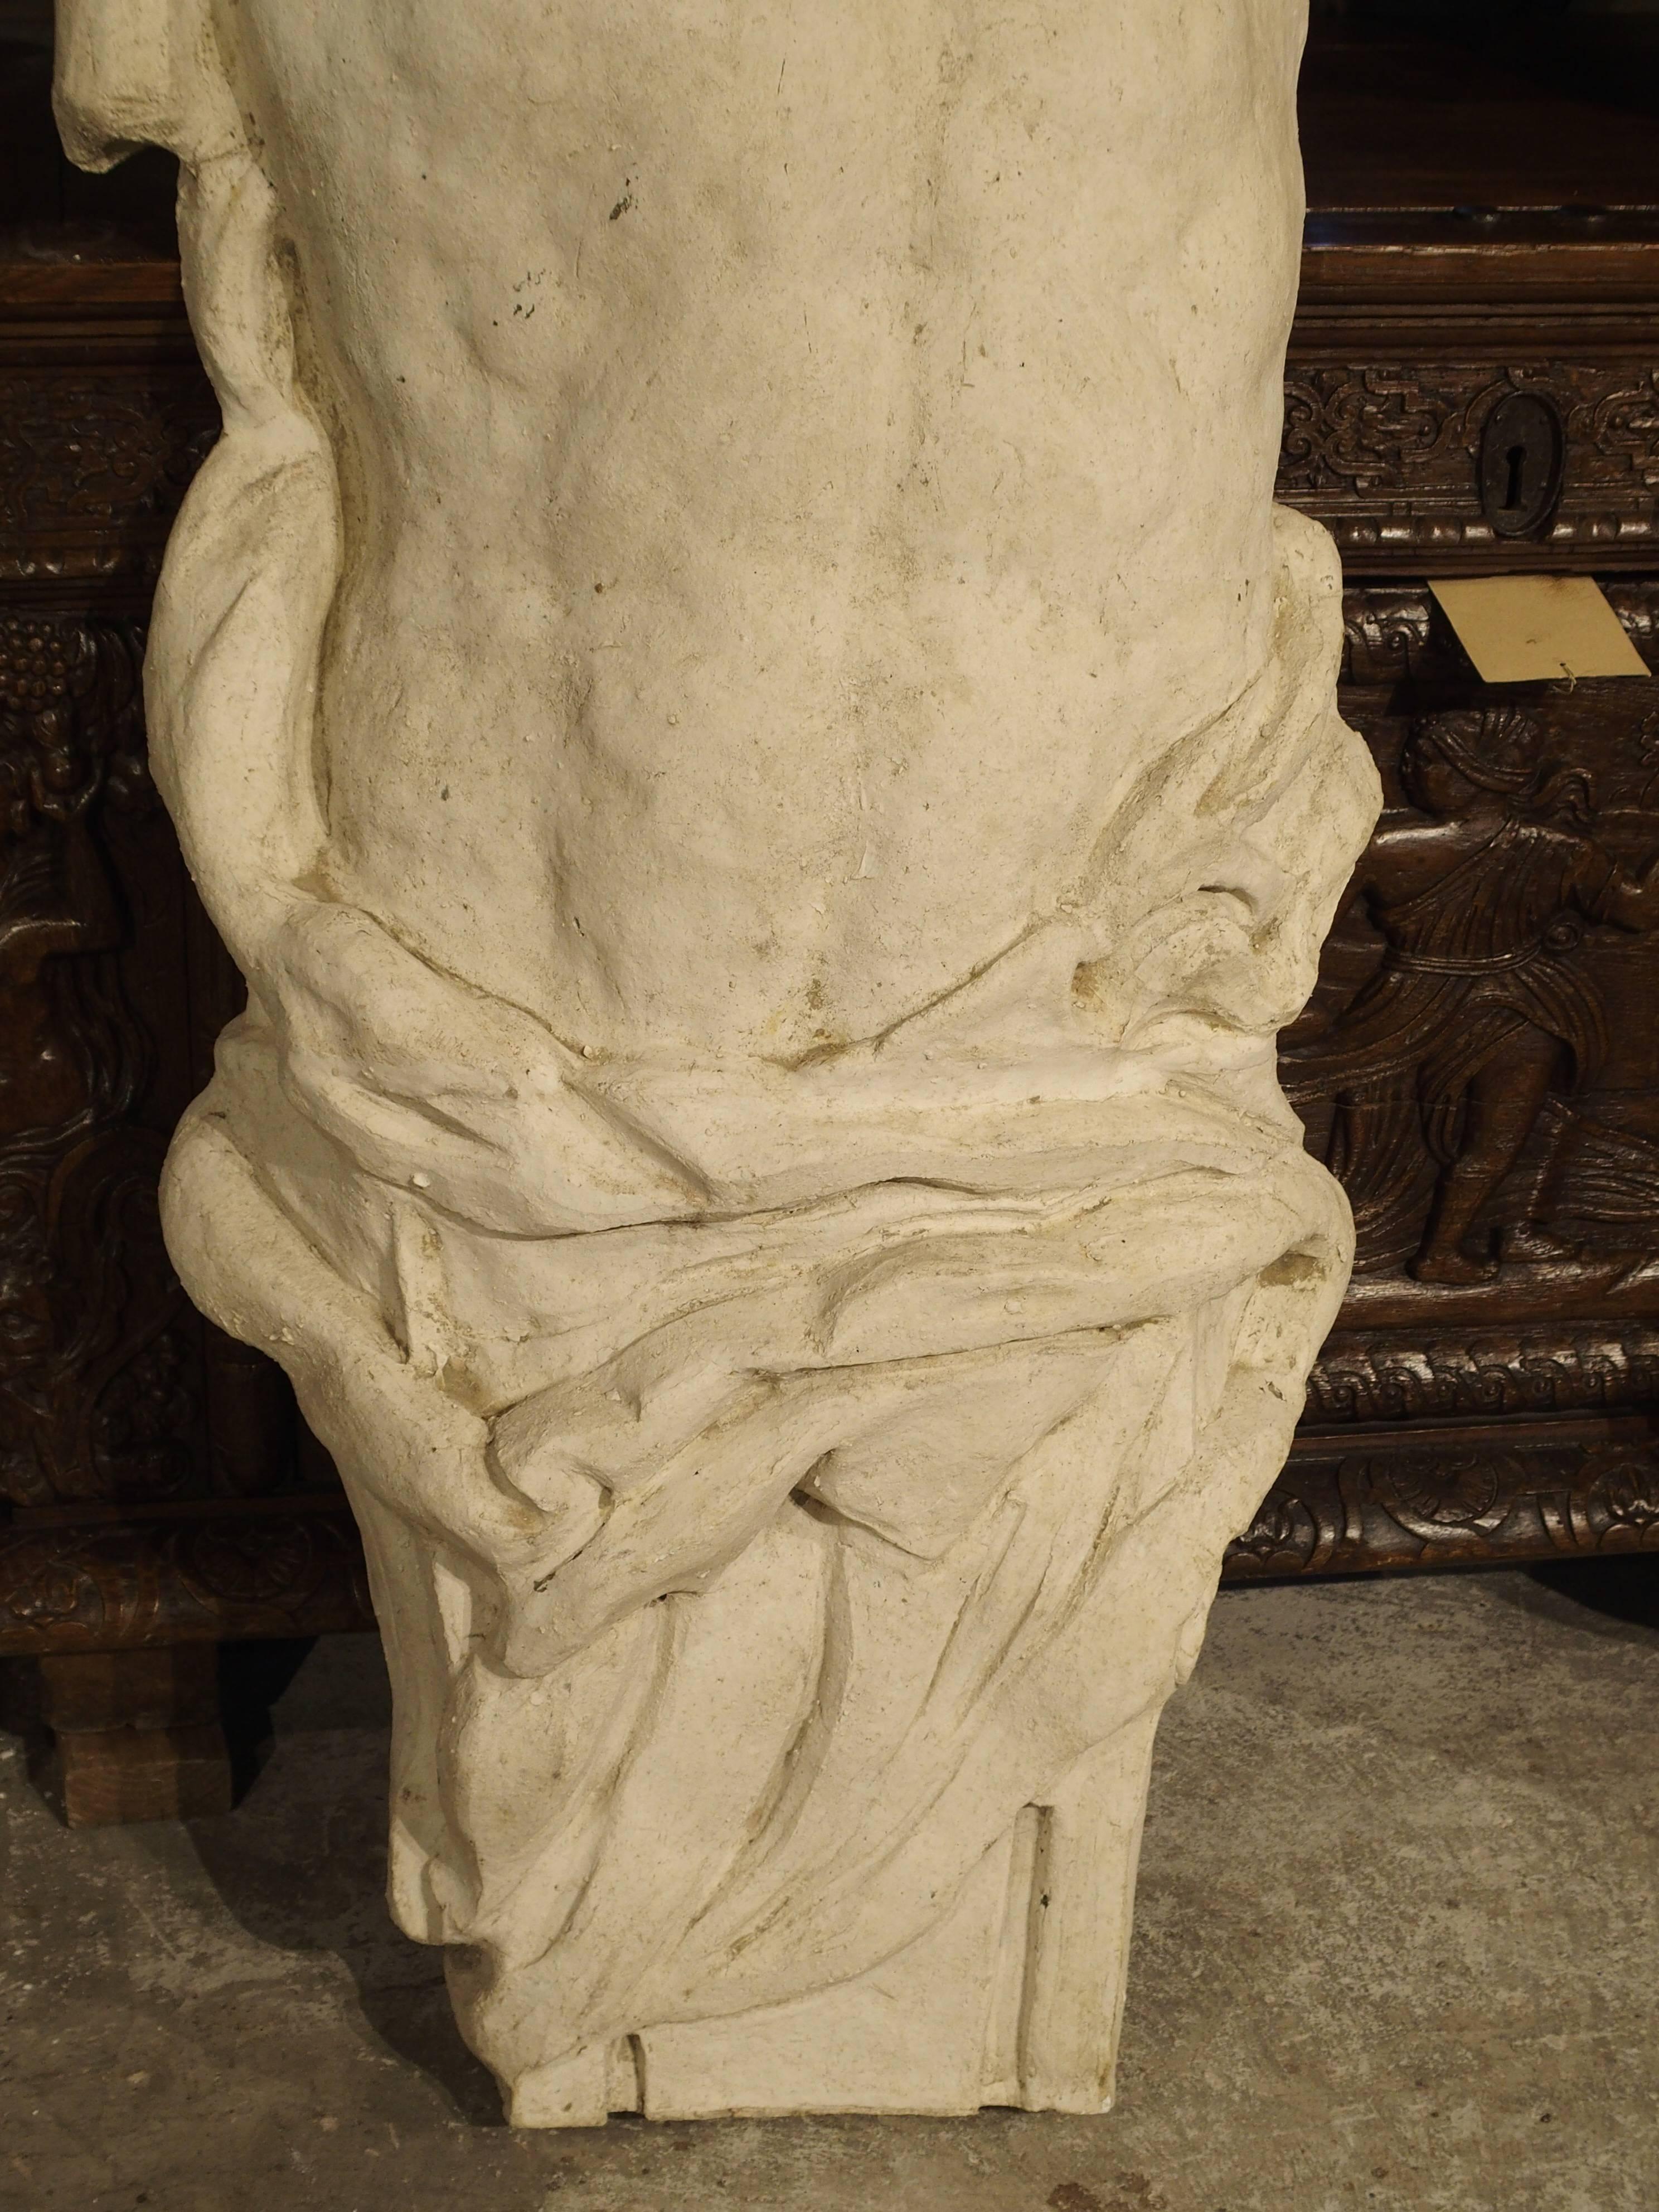 This pair of large male Atlases’ from France has been made from plaster and fiberglass. They are the male version of a caryatid, used as architectural column supports in the shape of a human figure. They are hollow in the back, with arms folded over